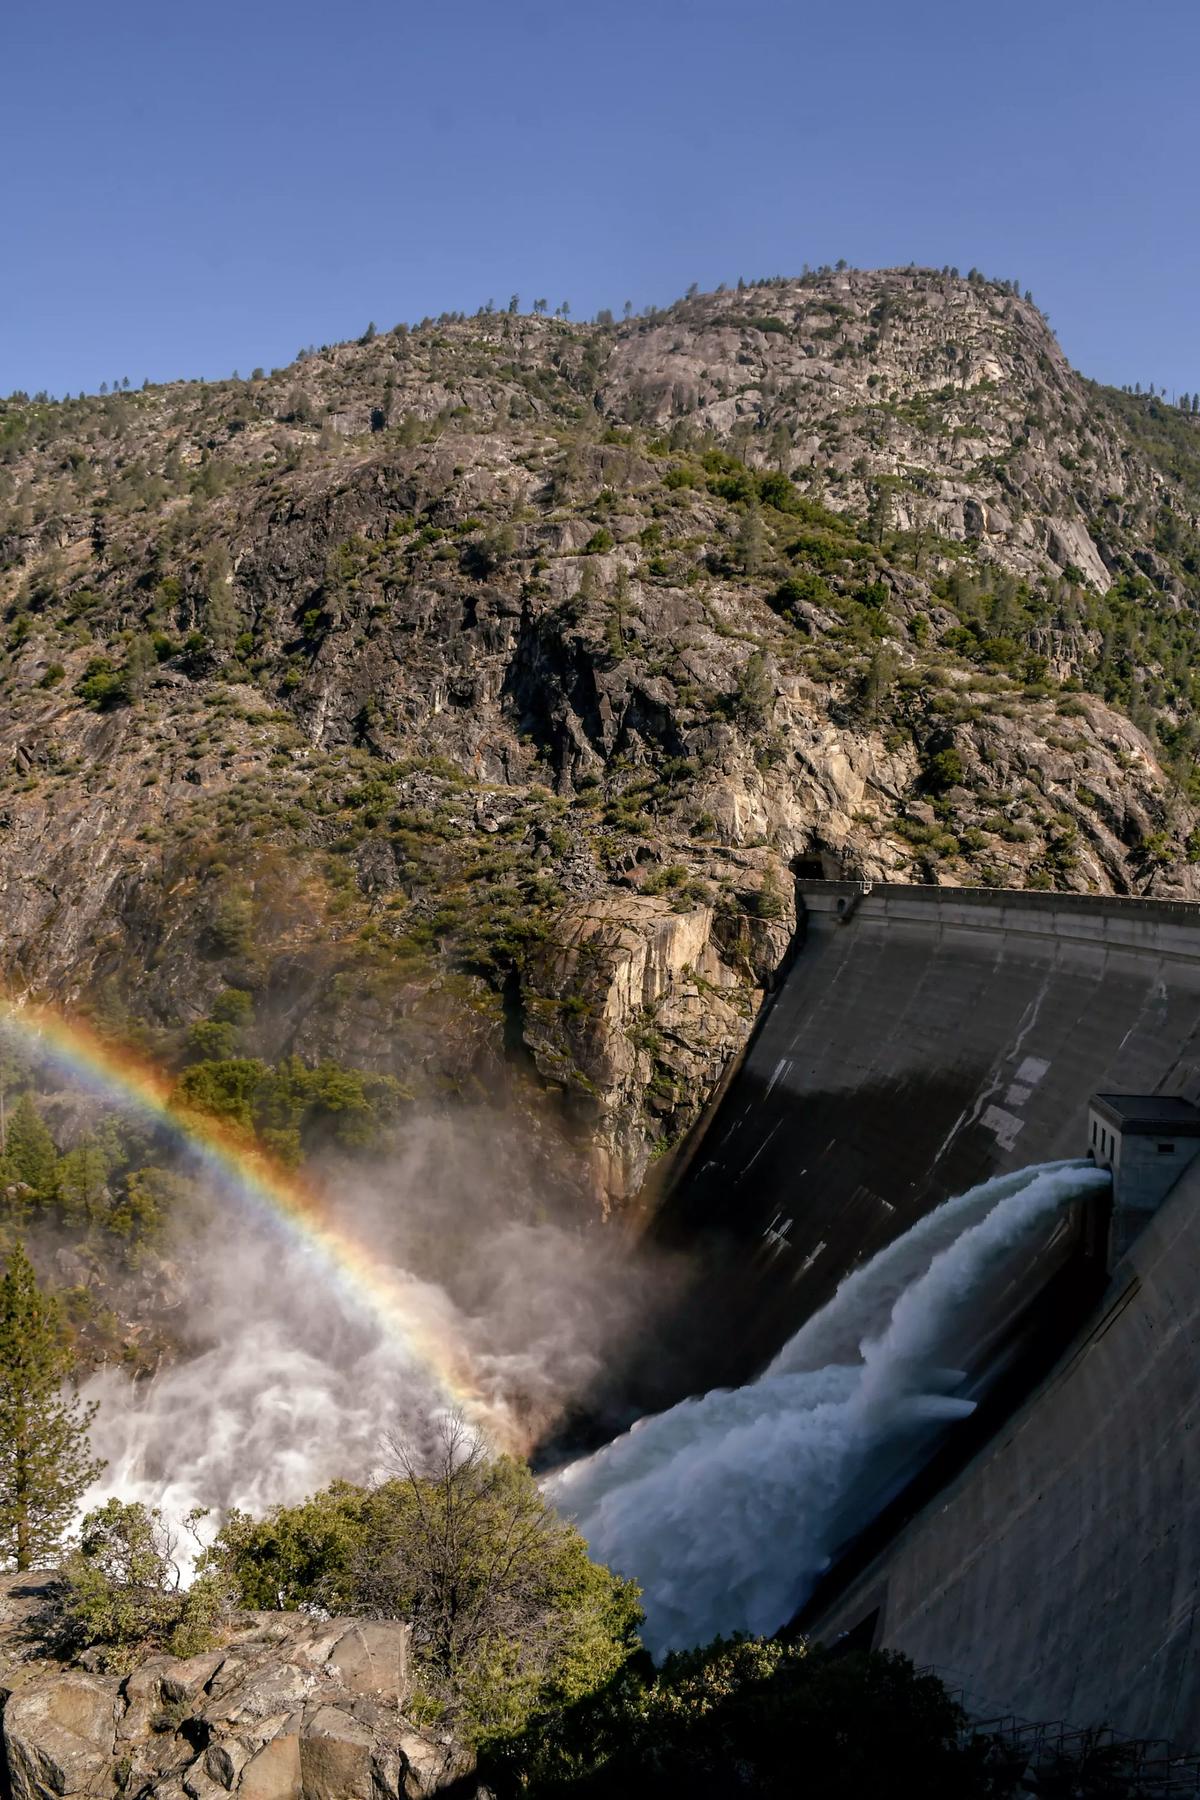 From the Hetch Hetchy Valley’s O’Shaughnessy Dam, the Tuolumne River flows into the San Joaquin Valley. At the dam, which visitors can walk across, falling water creates a fine mist, and rainbows are frequent. (Christopher Reynolds/Los Angeles Times/TNS)